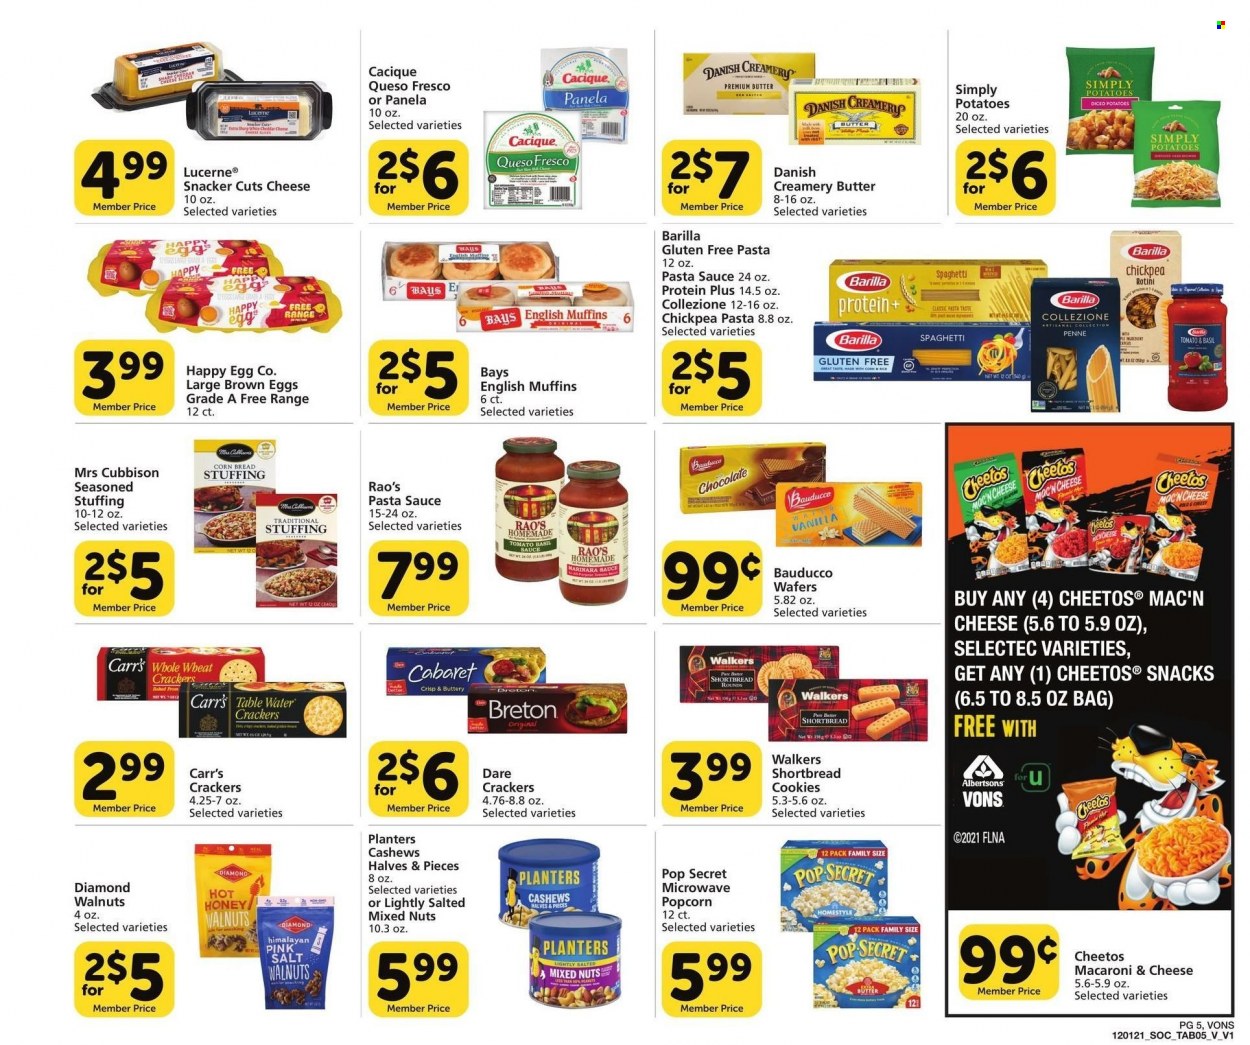 thumbnail - Vons Flyer - 12/01/2021 - 01/04/2022 - Sales products - bread, english muffins, corn bread, potatoes, diced potatoes, macaroni & cheese, spaghetti, pasta sauce, sauce, Barilla, queso fresco, eggs, butter, cookies, wafers, chocolate, snack, crackers, Cheetos, popcorn, penne, honey, cashews, walnuts, mixed nuts, Planters, pan. Page 5.